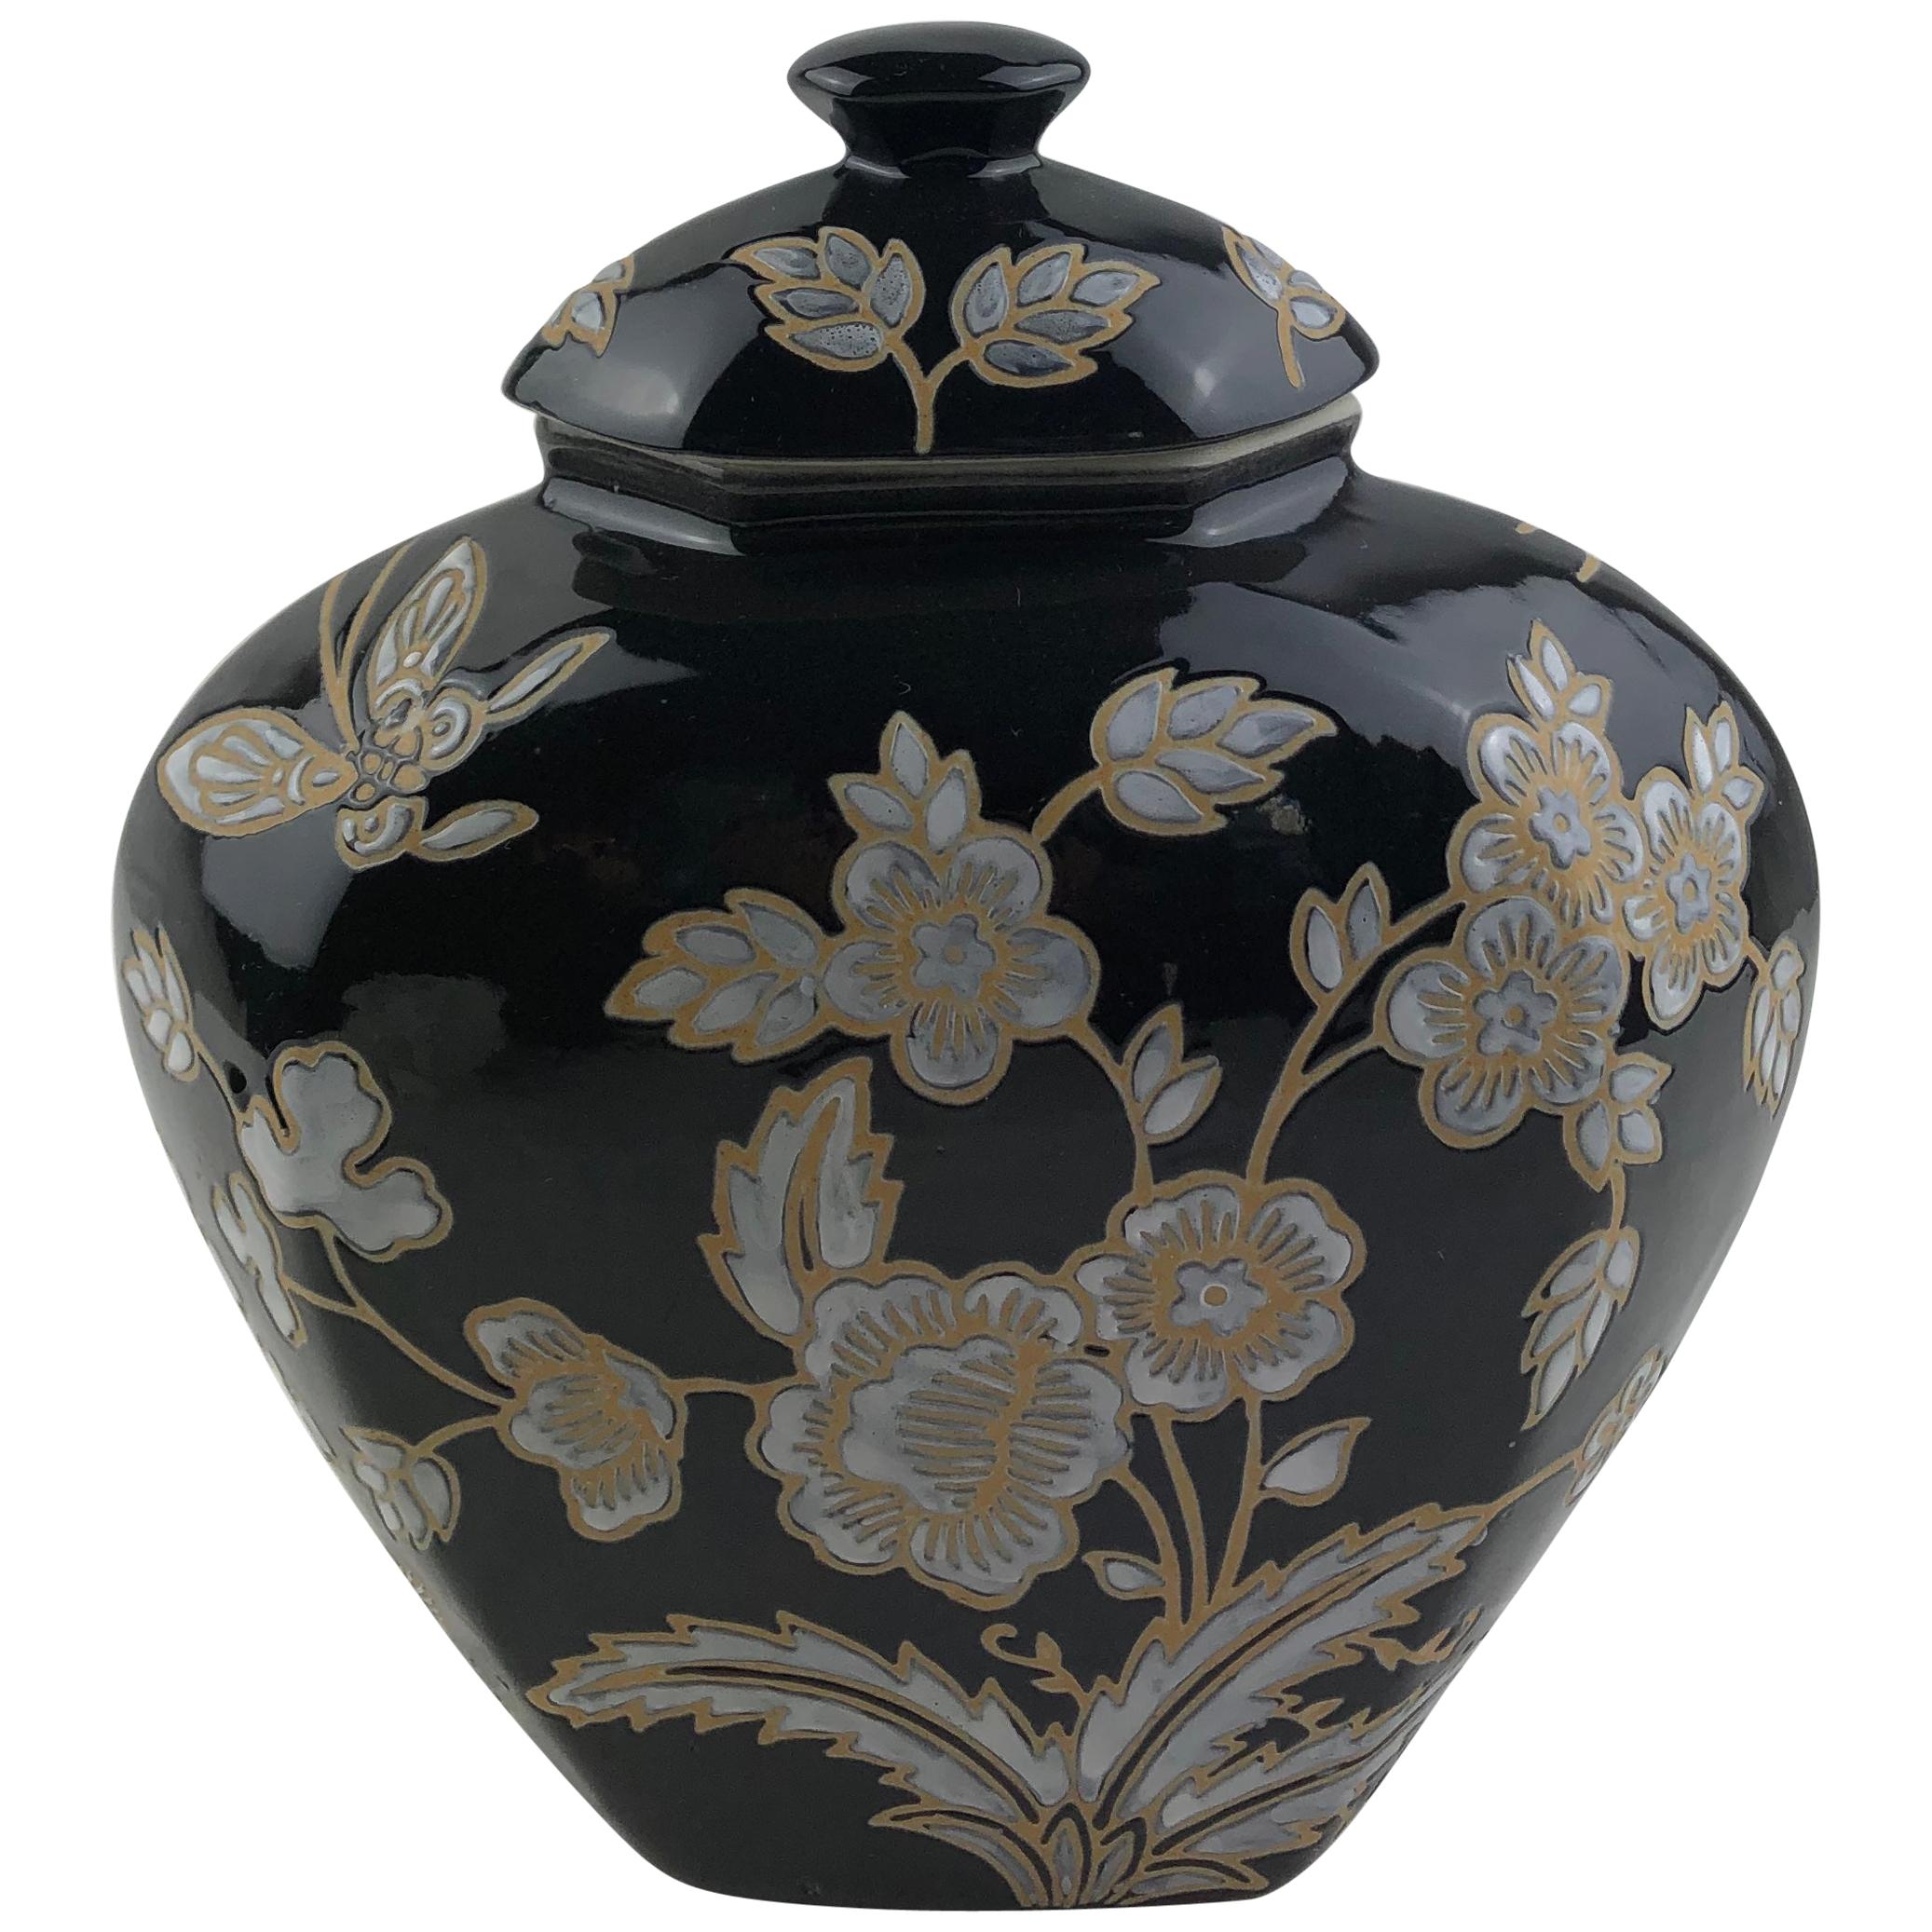 French Black and Antique White Majolica Lidded Jar with Molded Floral Decor